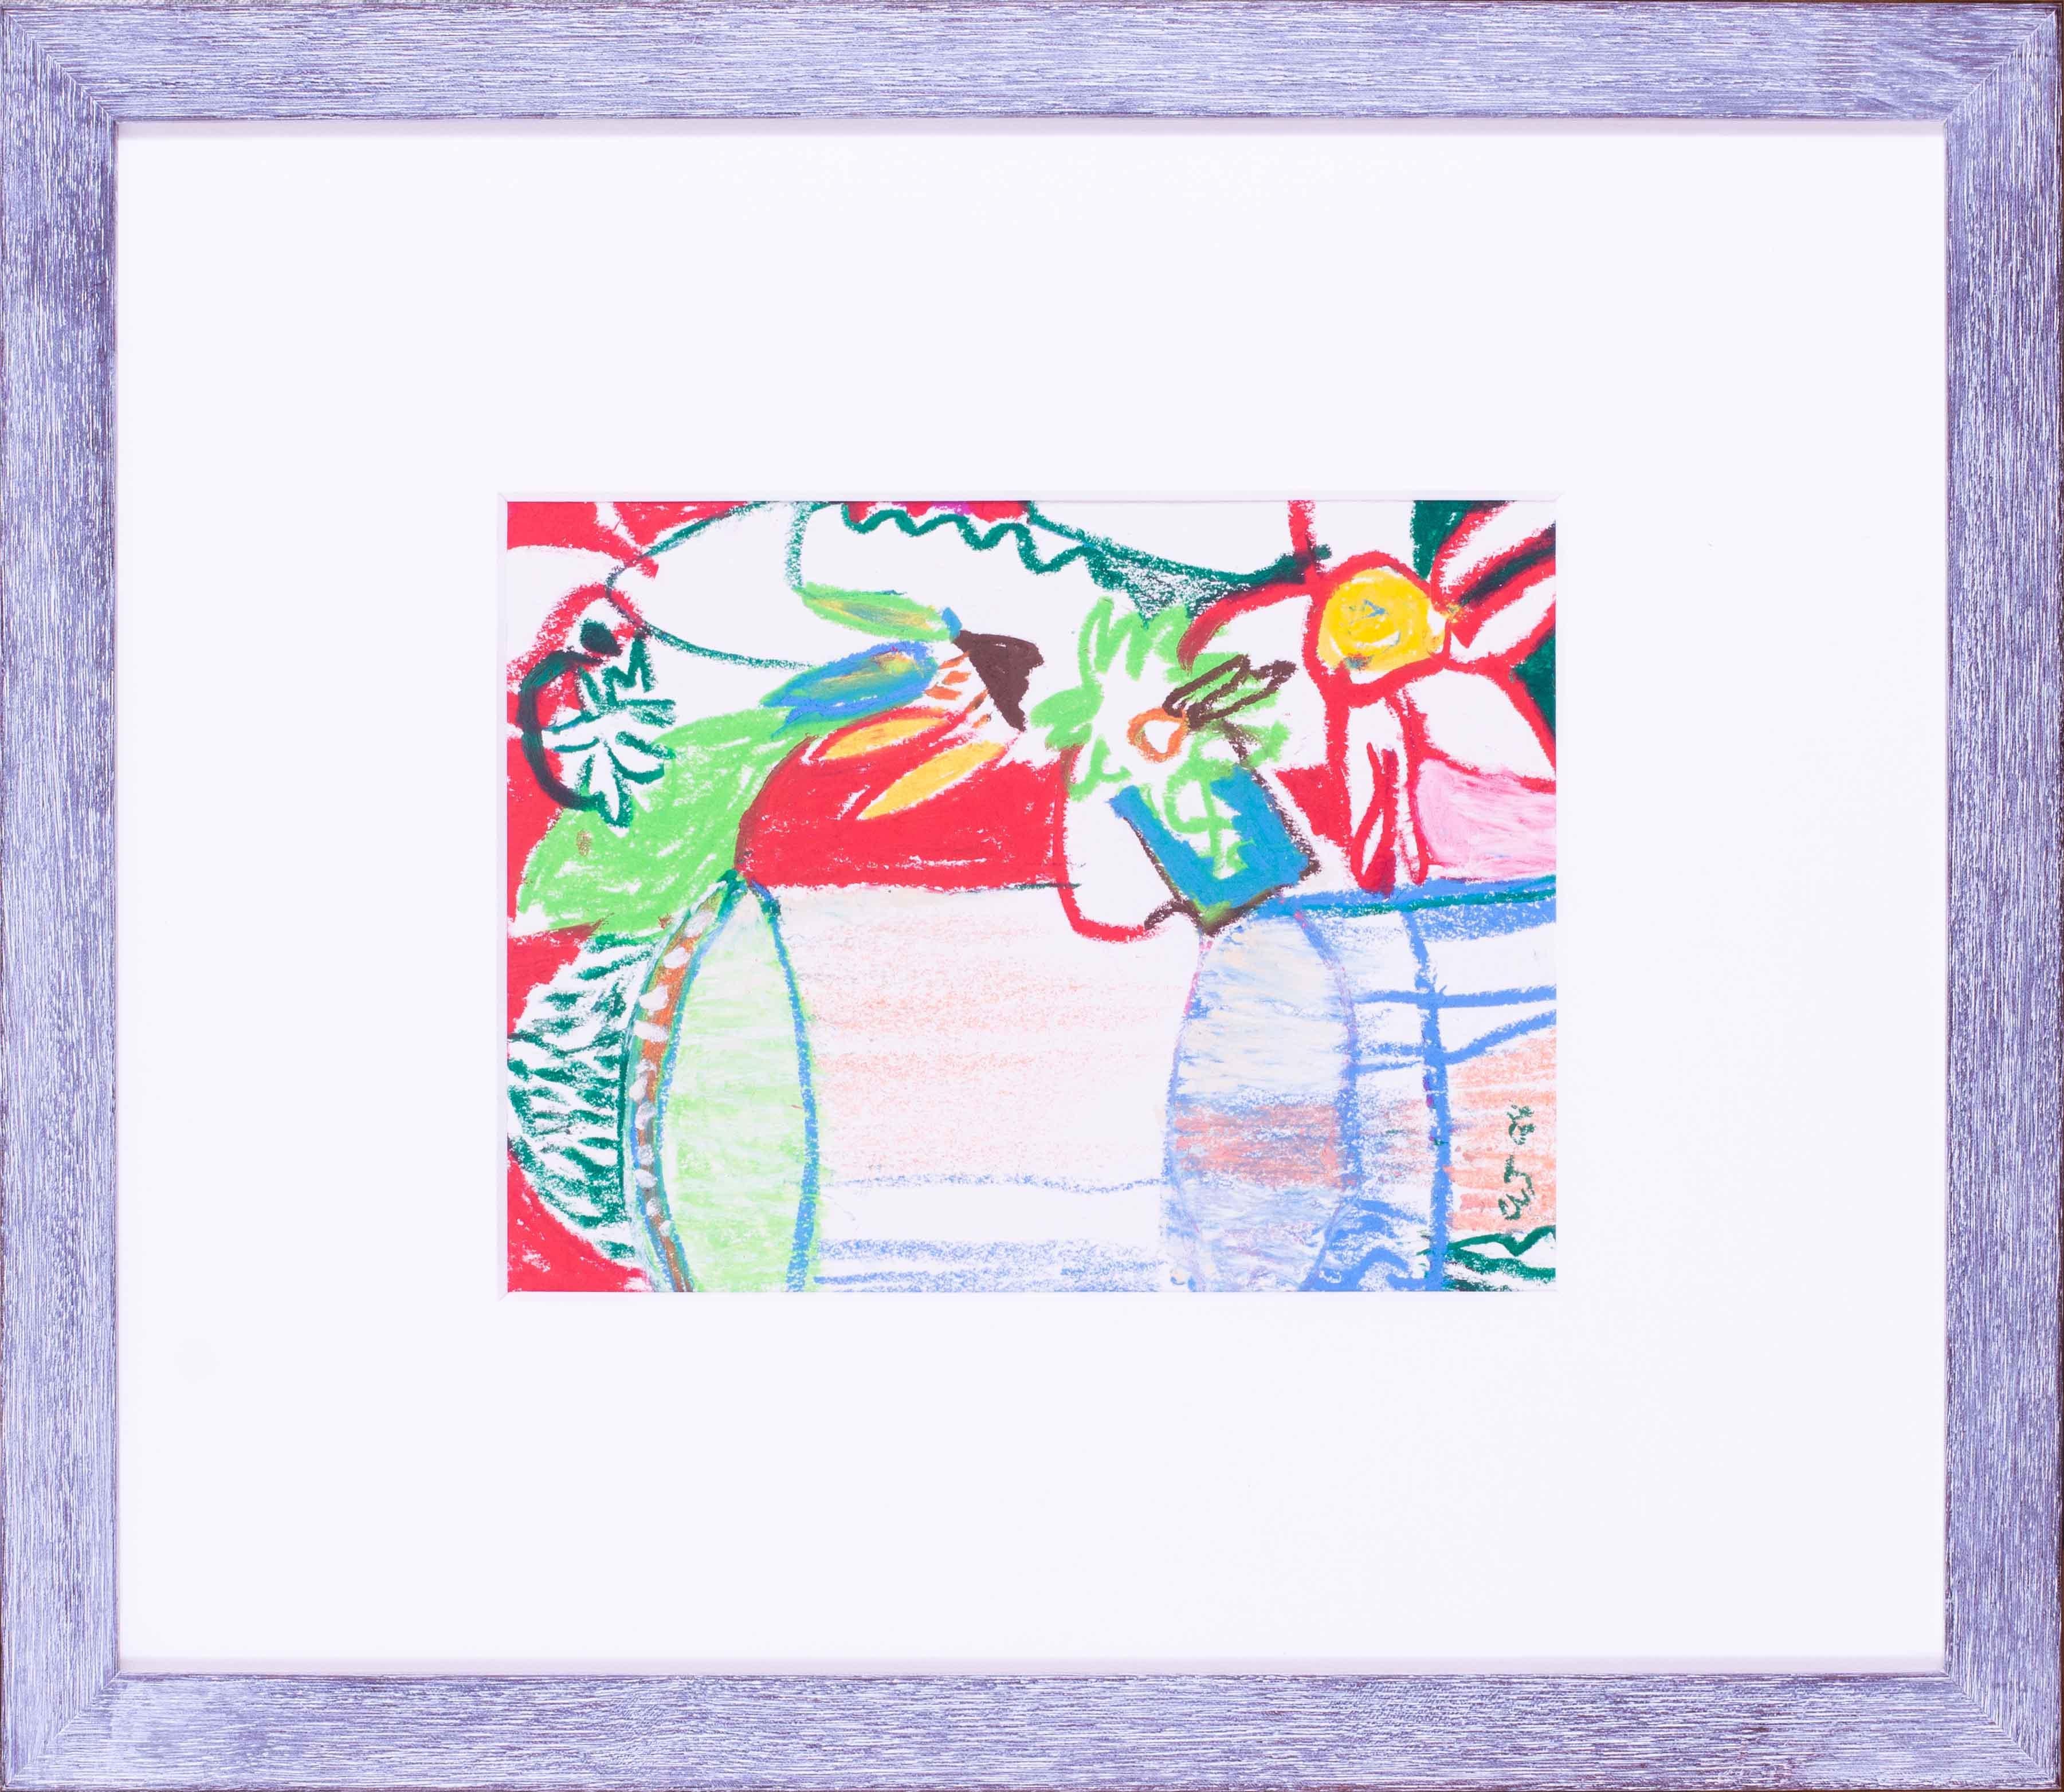 Vibrant abstract picture of jar and flowers by Modern British artist Ewart Johns For Sale 2